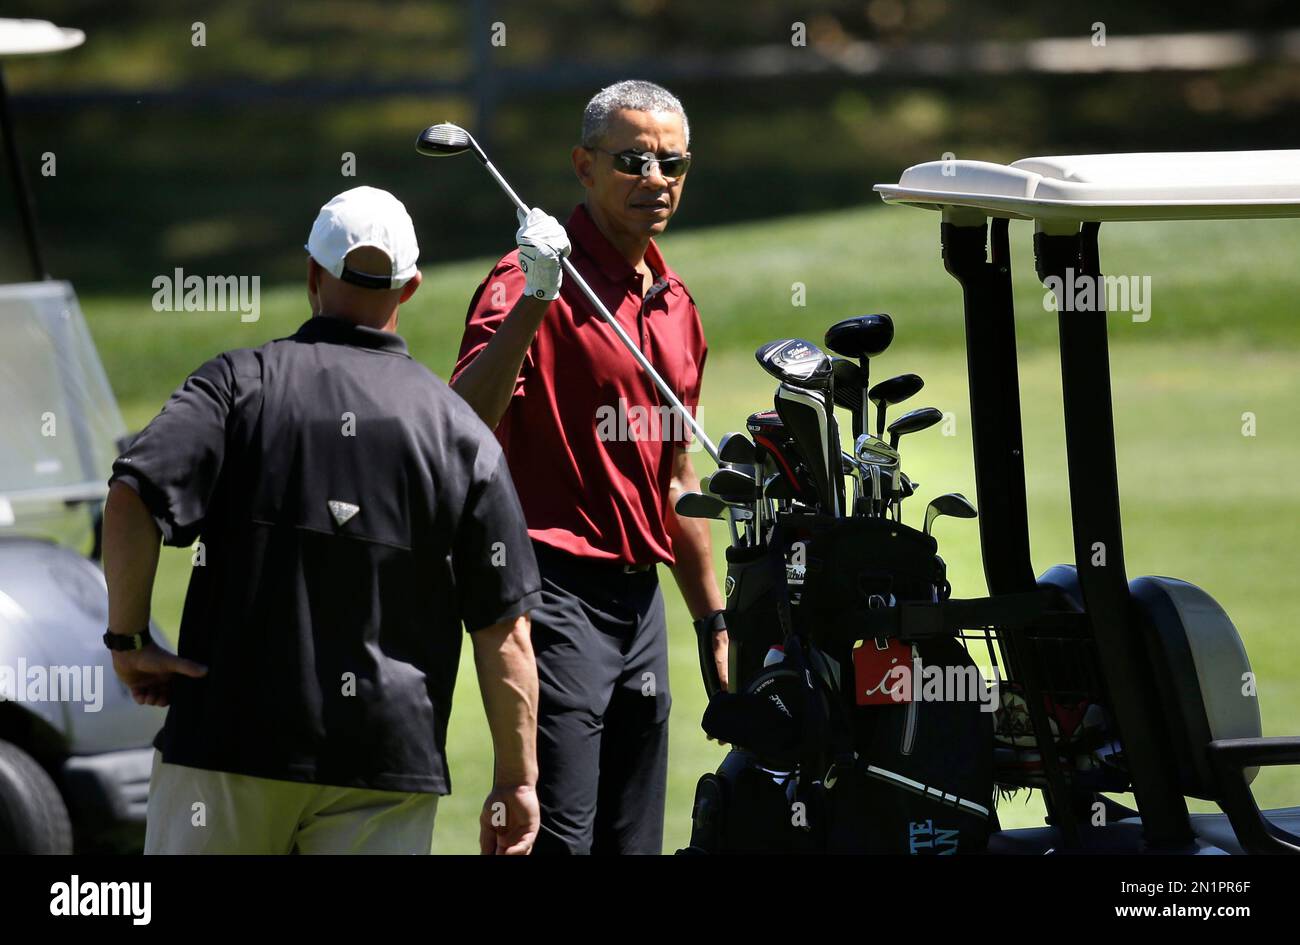 President Barack Obama returns a club to the cart while golfing Friday, Aug. 14, 2015, at Farm Neck Golf Club, in Oak Bluffs, Mass., on the island of Martha's Vineyard. The president, first lady Michelle Obama, and daughter Sasha are vacationing on the island. (AP Photo/Steven Senne) Stock Photo